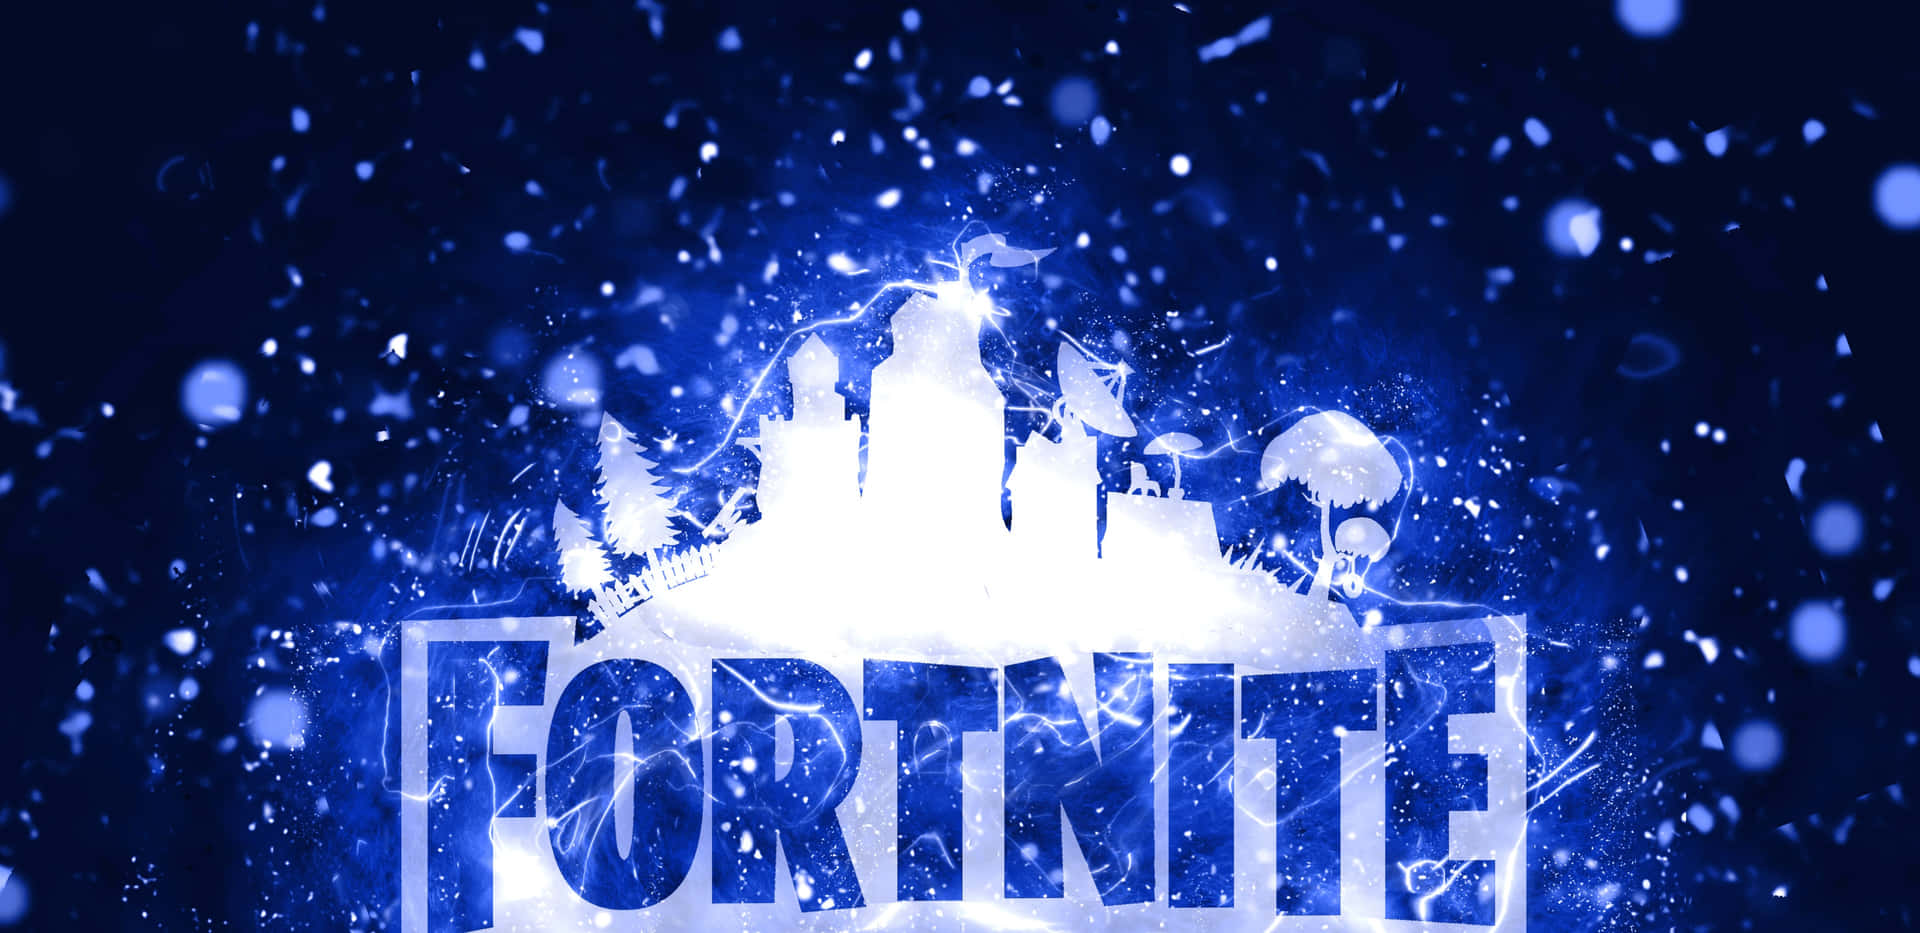 Fortnite Logo With Snow Falling On It Wallpaper